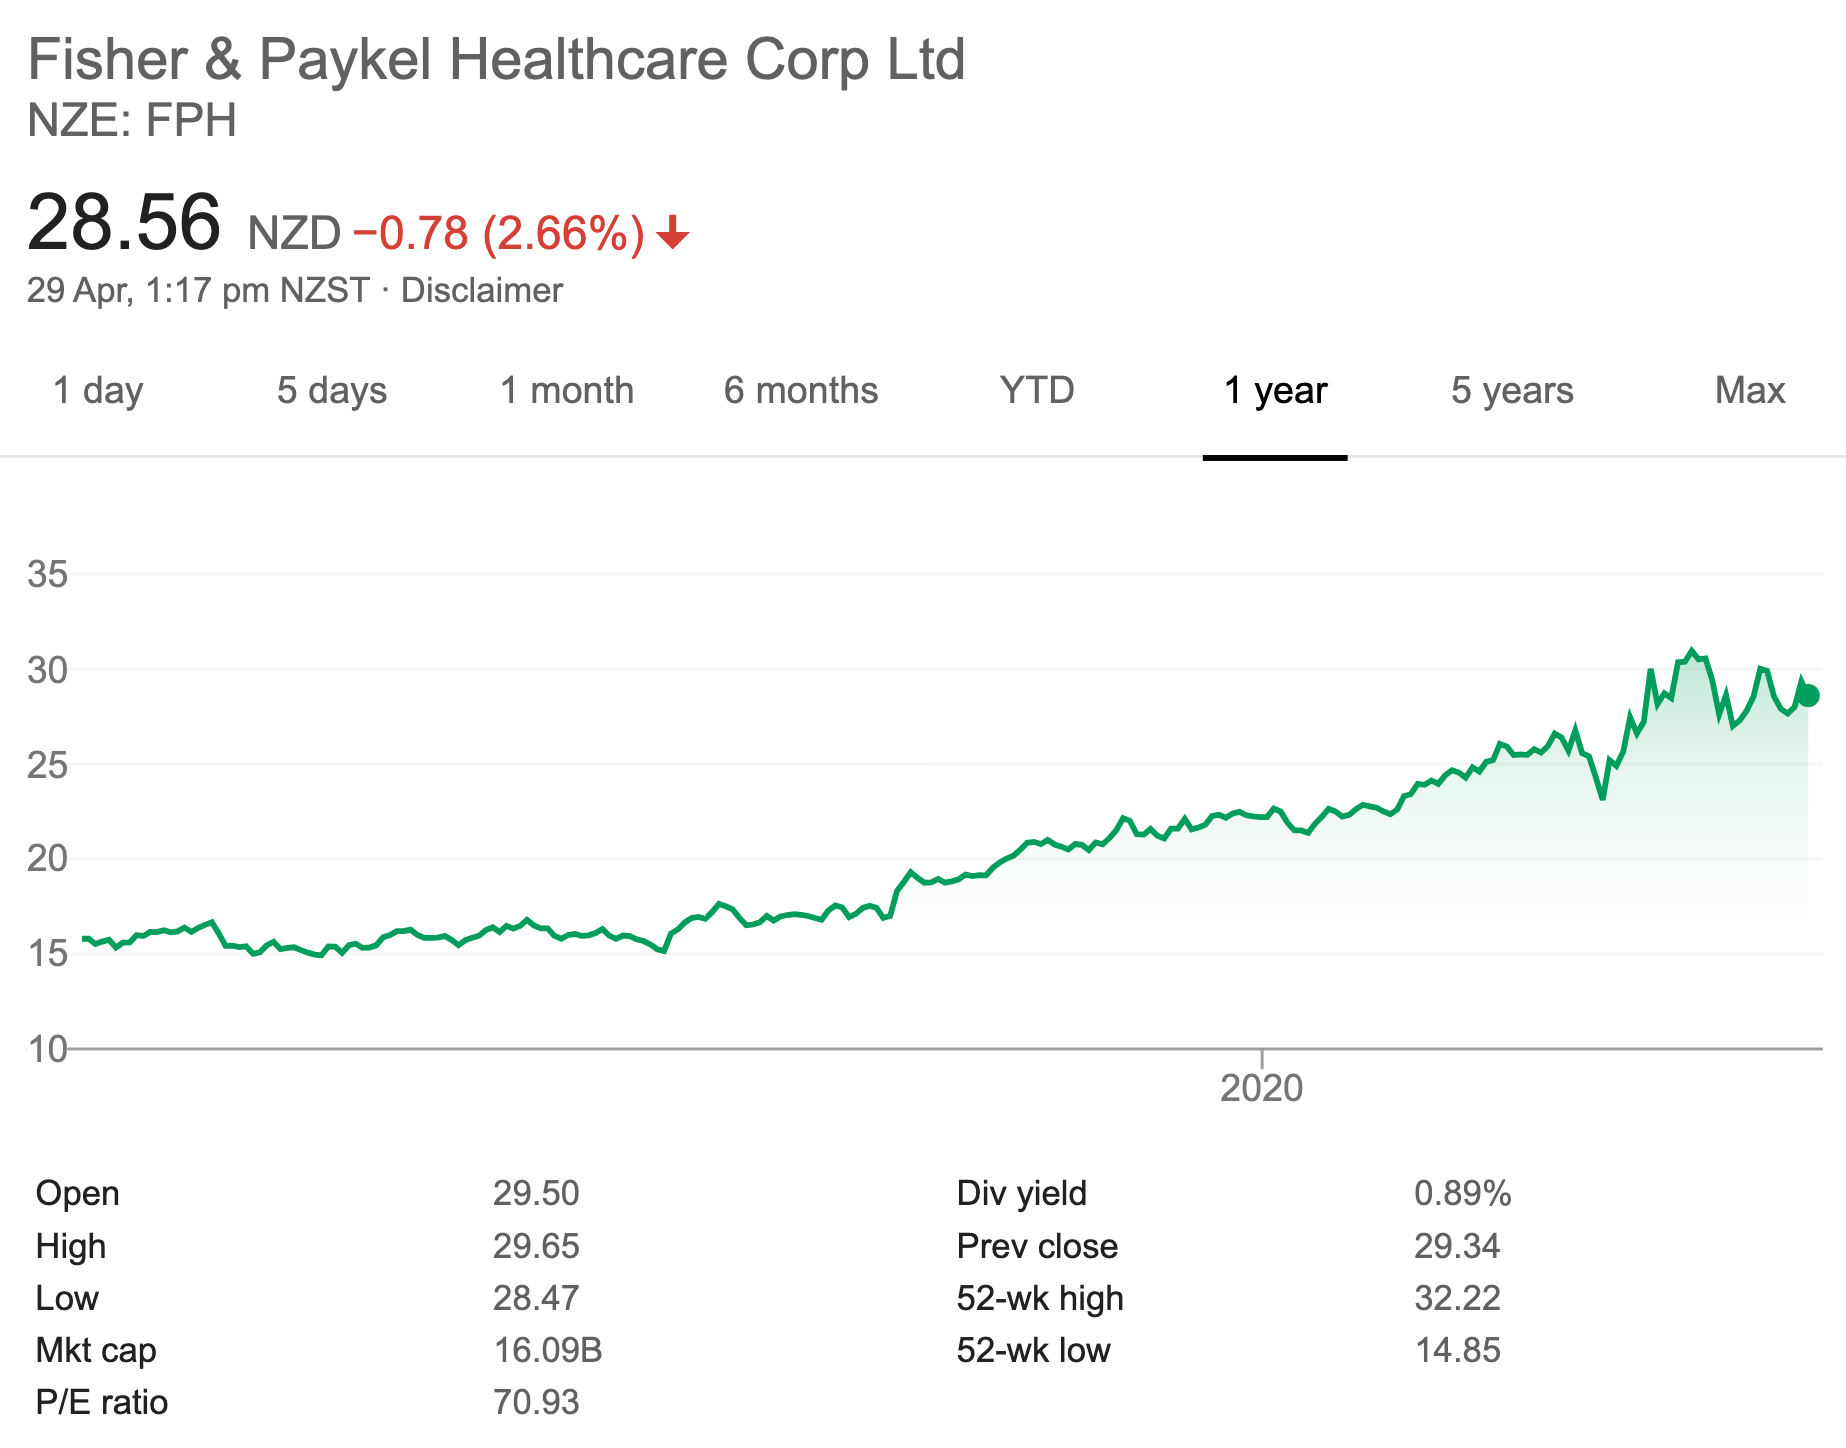 FPH - 1 Year Stock Price Performance